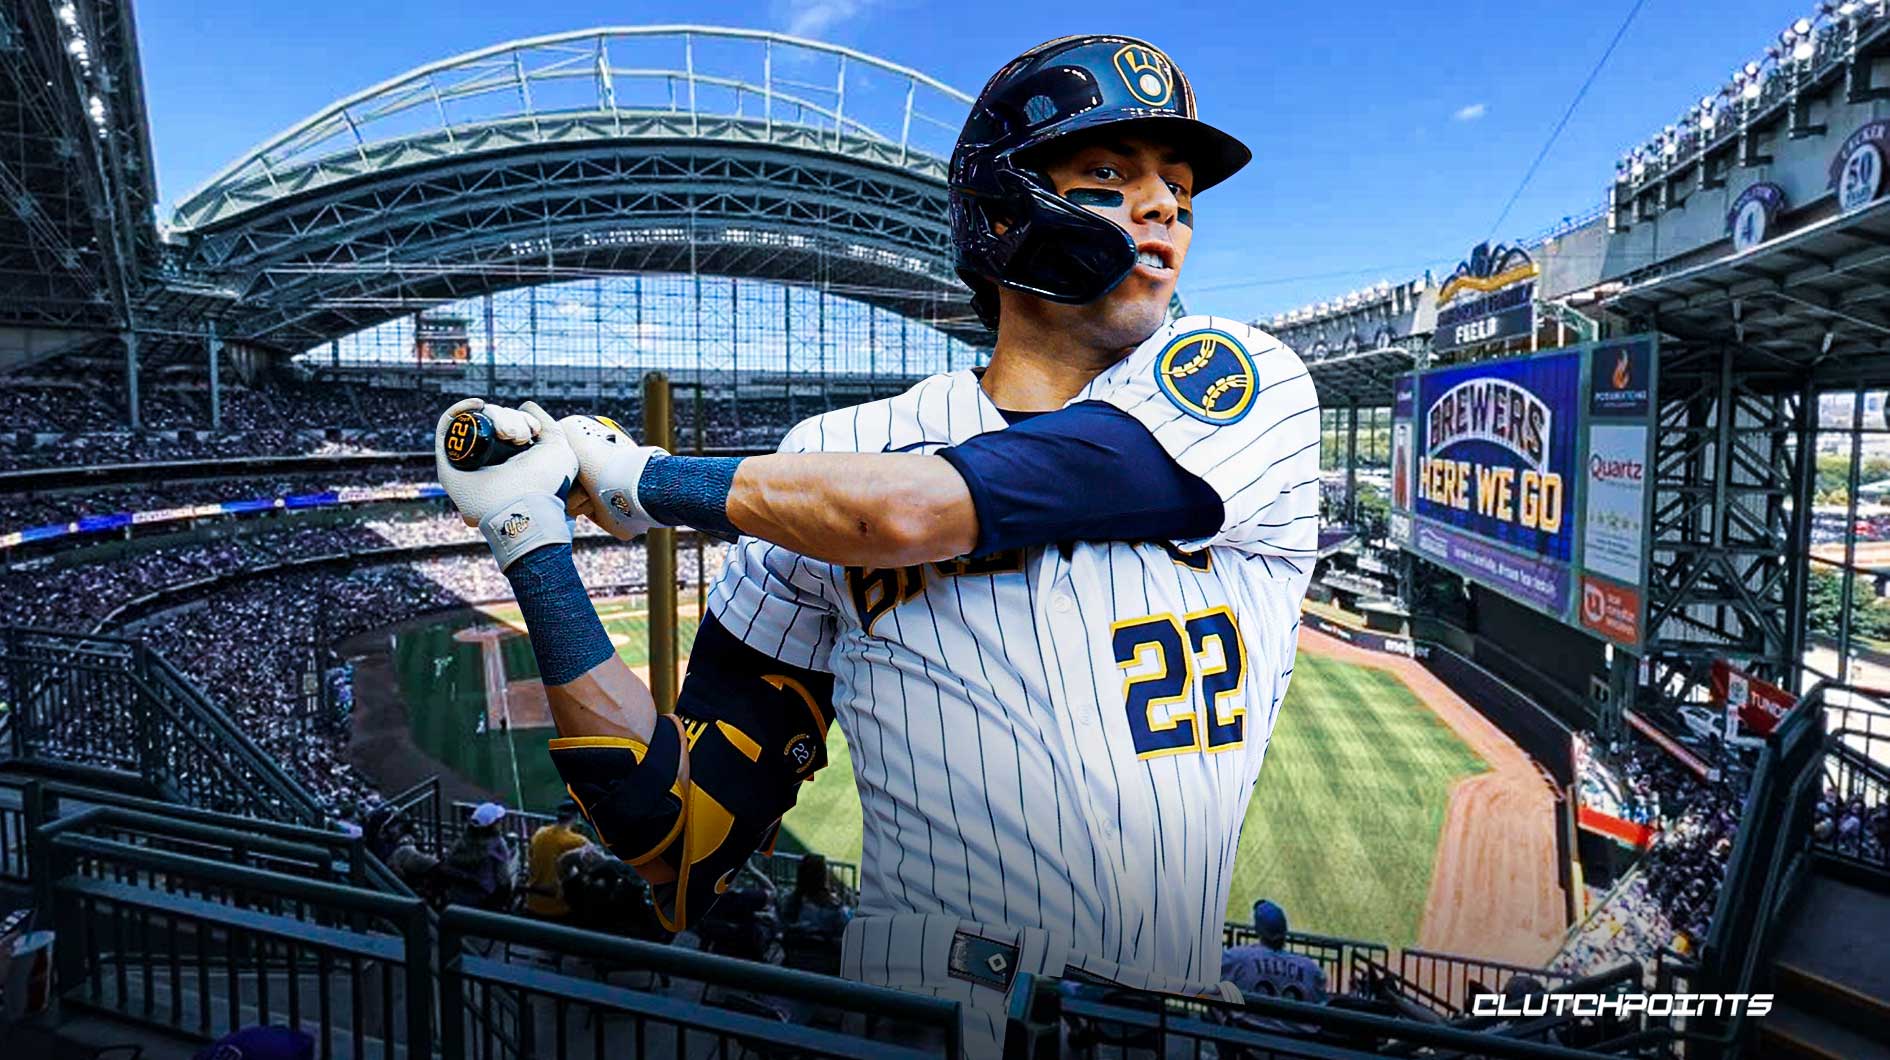 VIDEO: Brewers Star Christian Yelich Talks About Being Chosen to